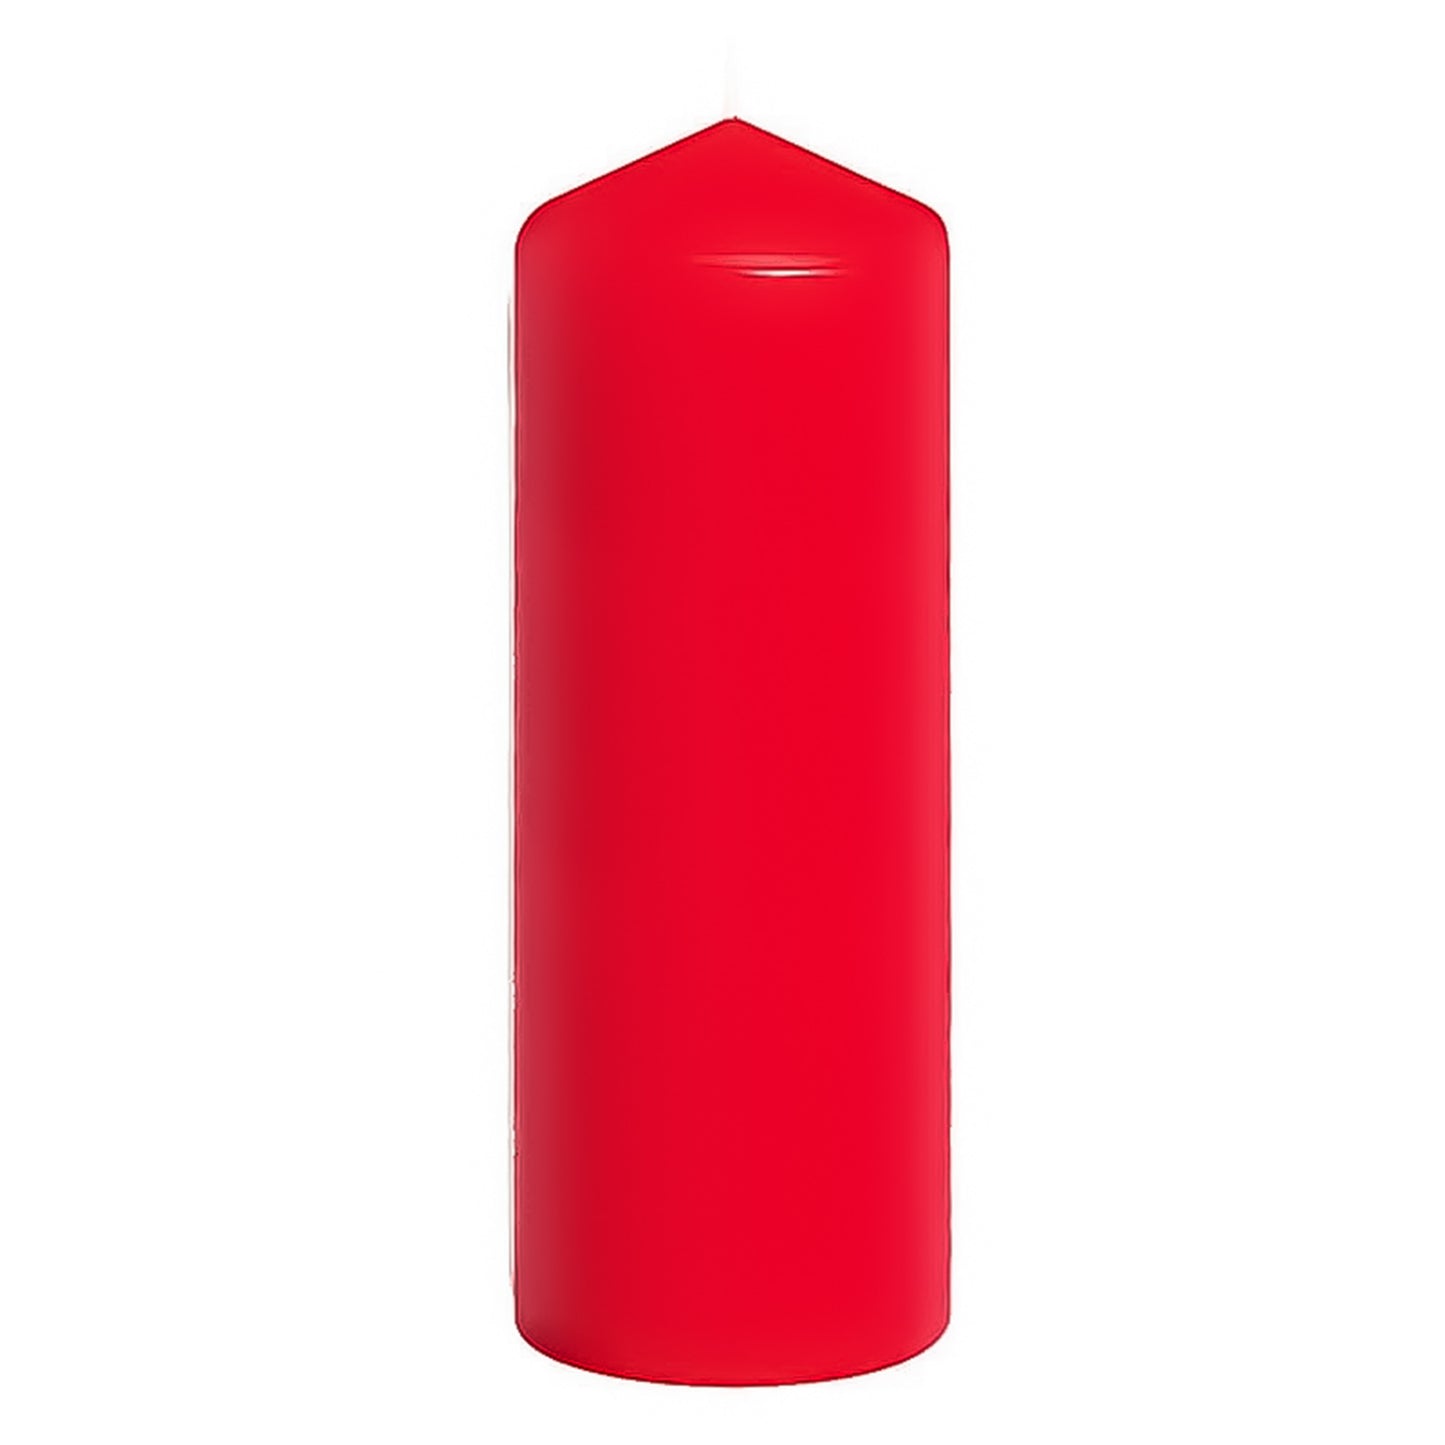 3"x6" Unscented Red Pillar Candle  WICK & WAX   